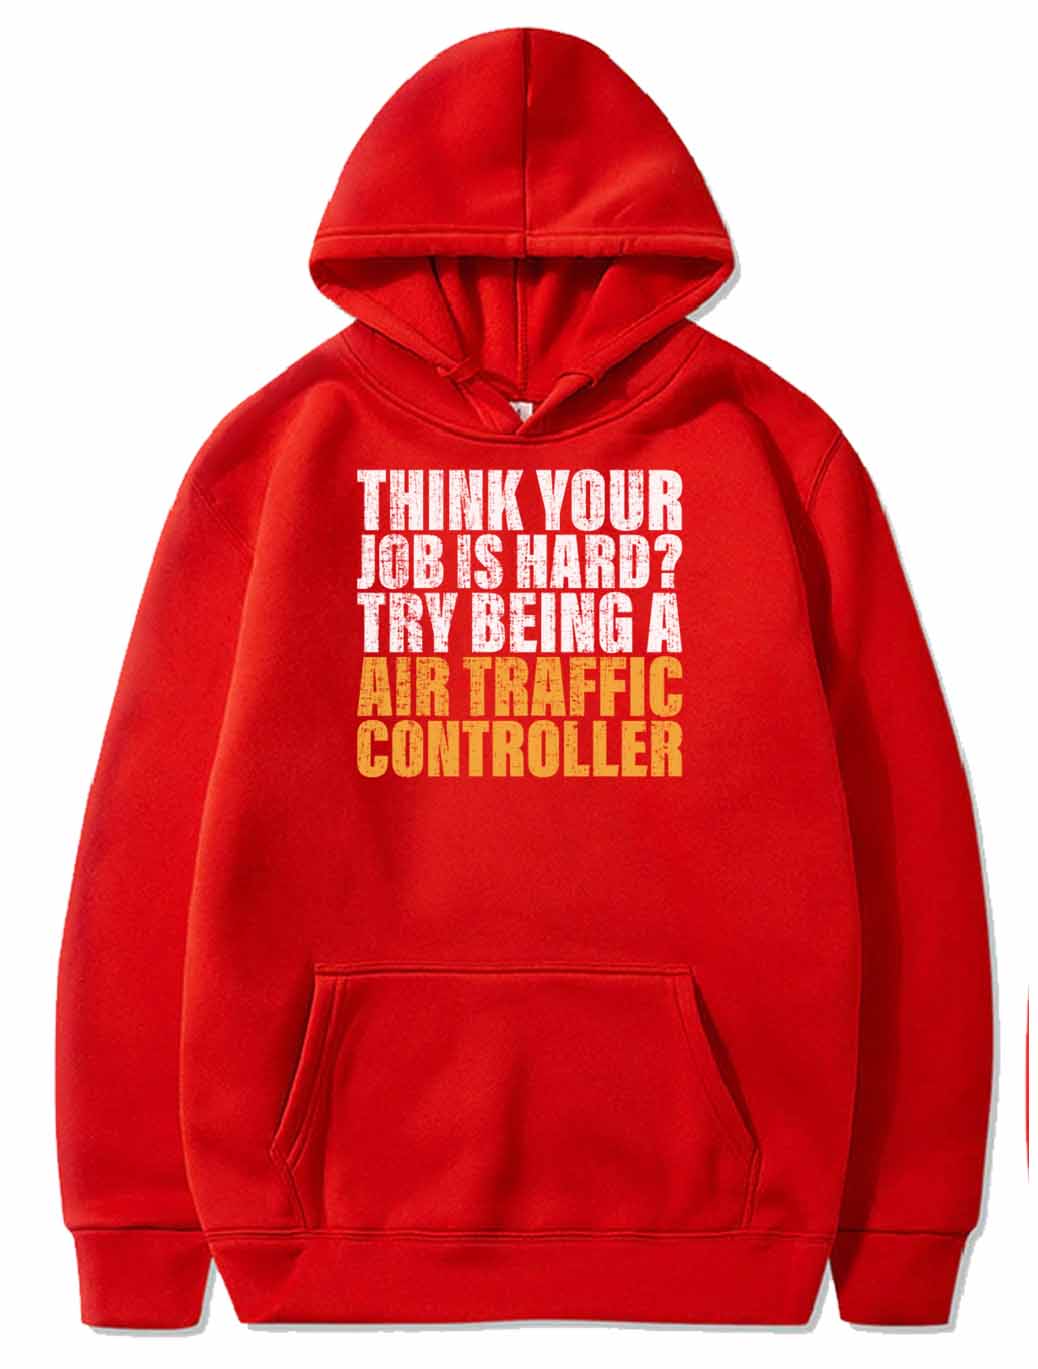 Try Being A Air Traffic Controller Design for ATC PULLOVER THE AV8R